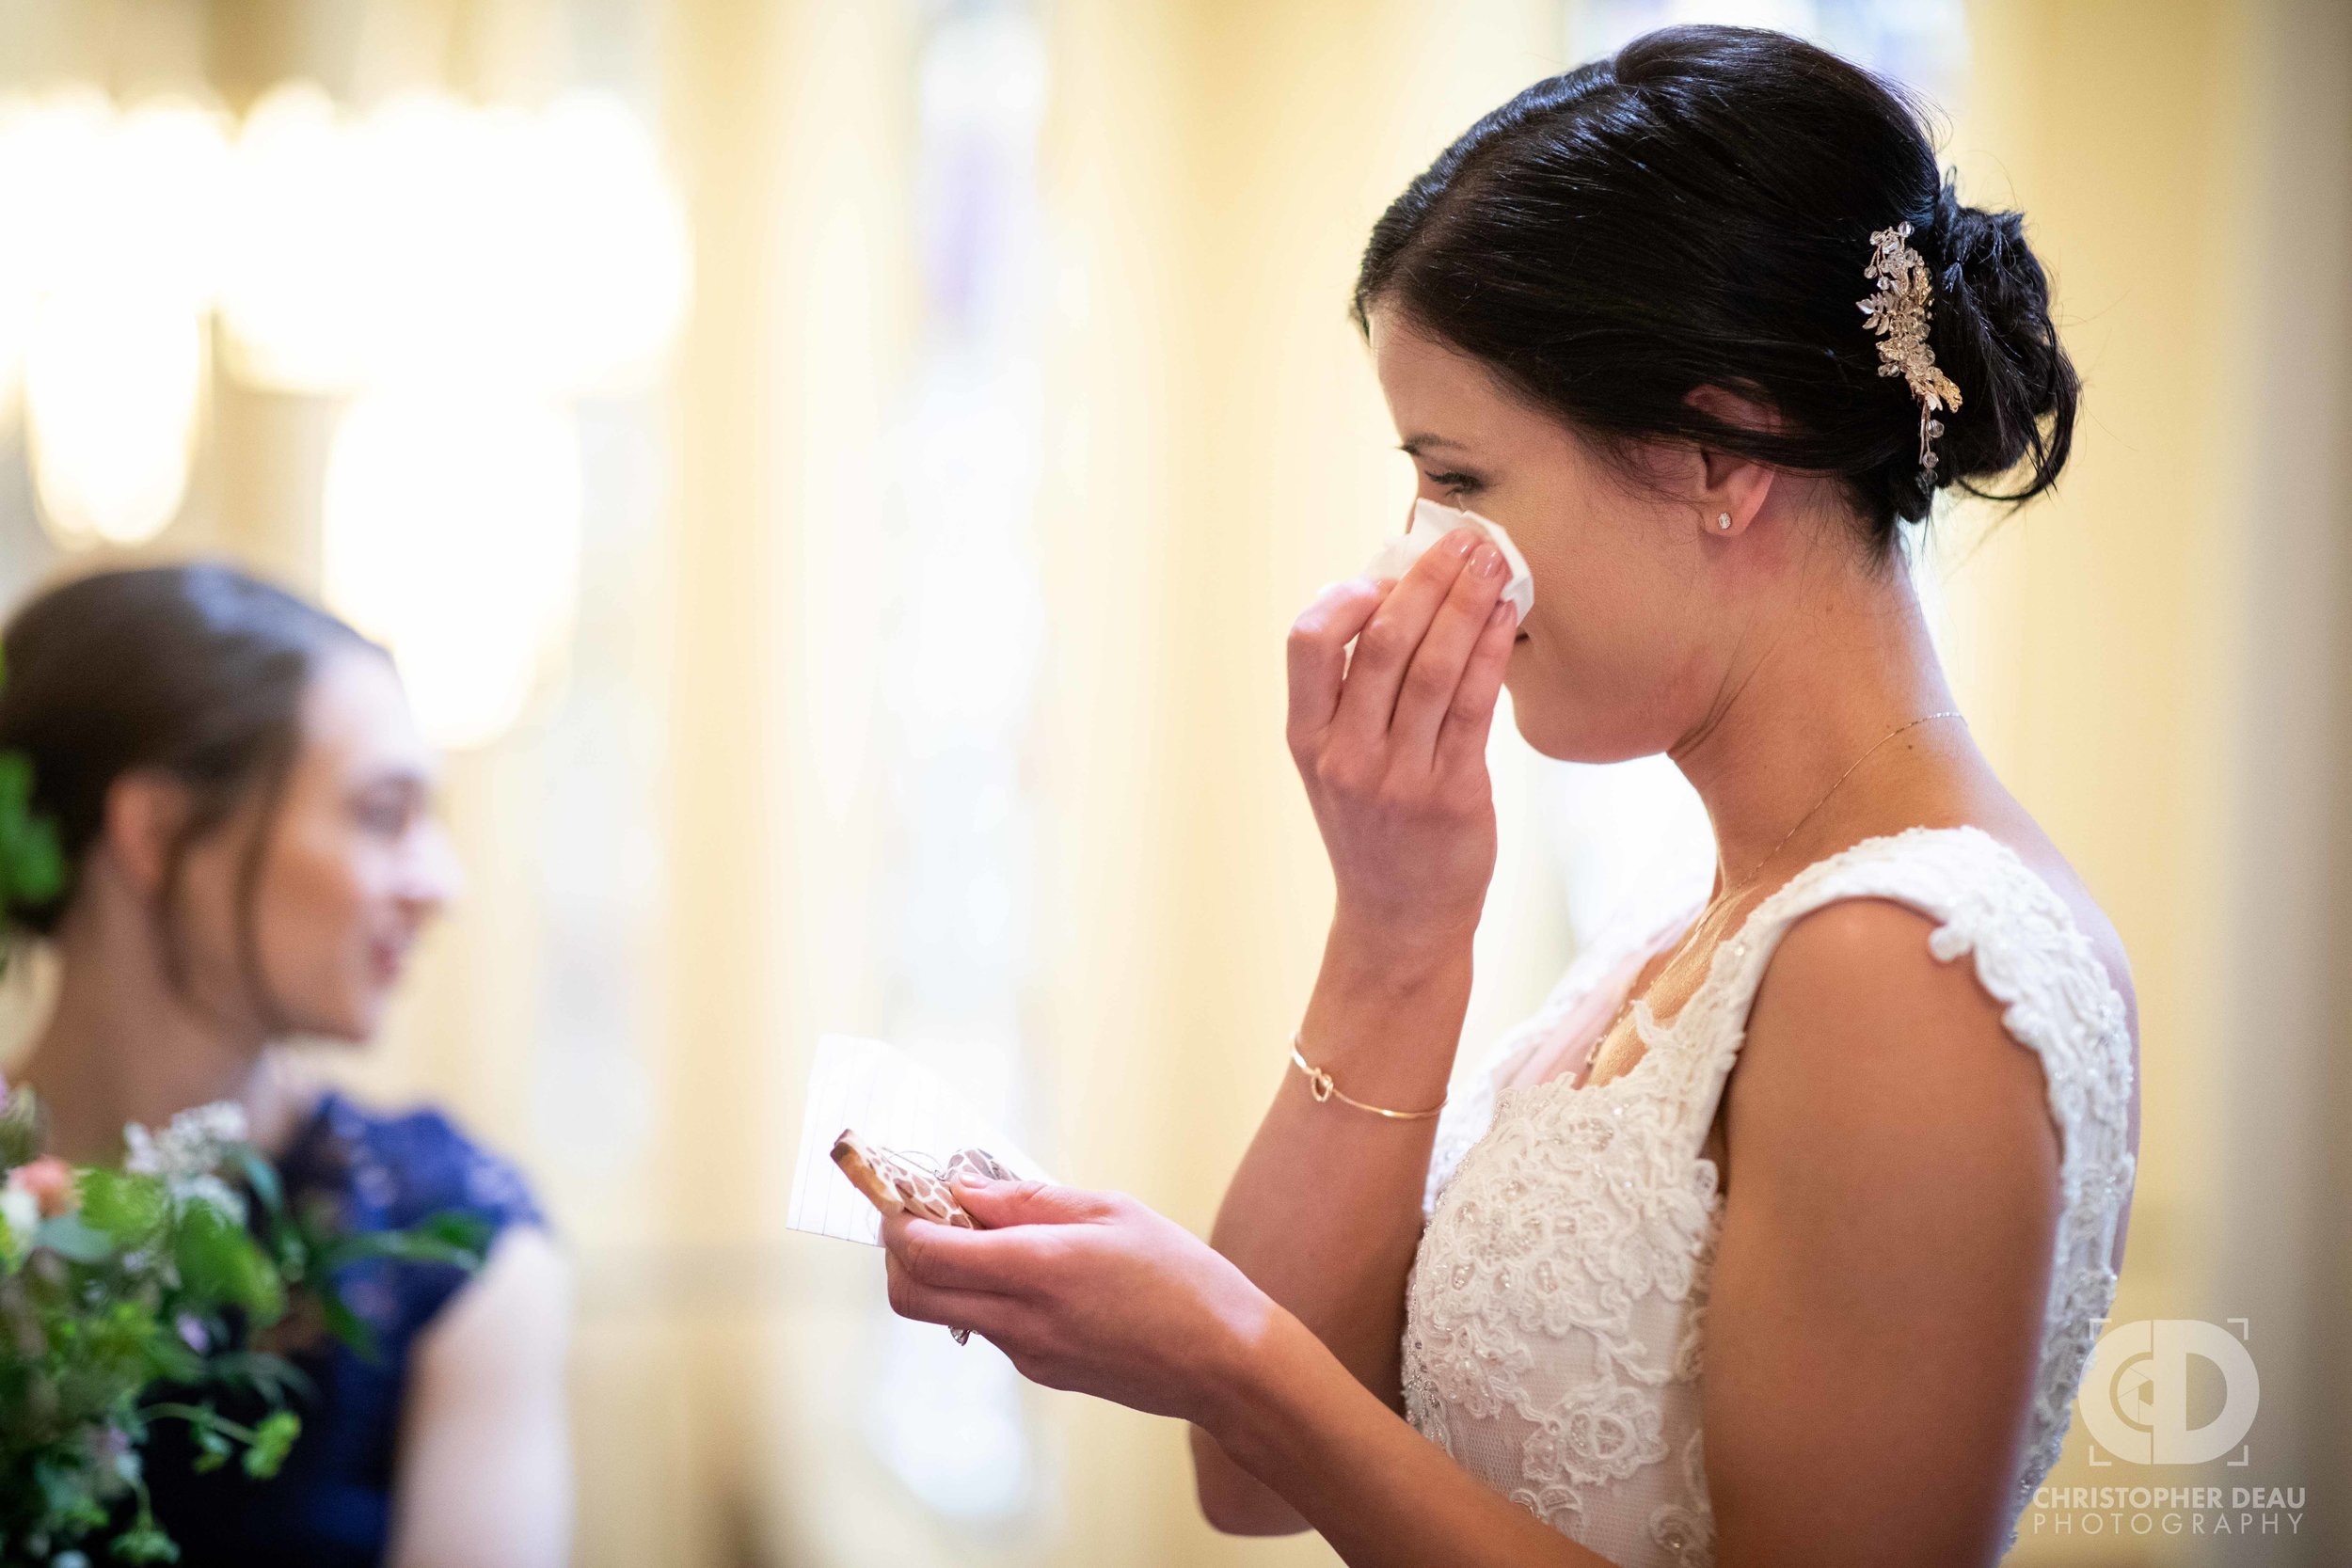  The bride crying while reading a letter from the groom 